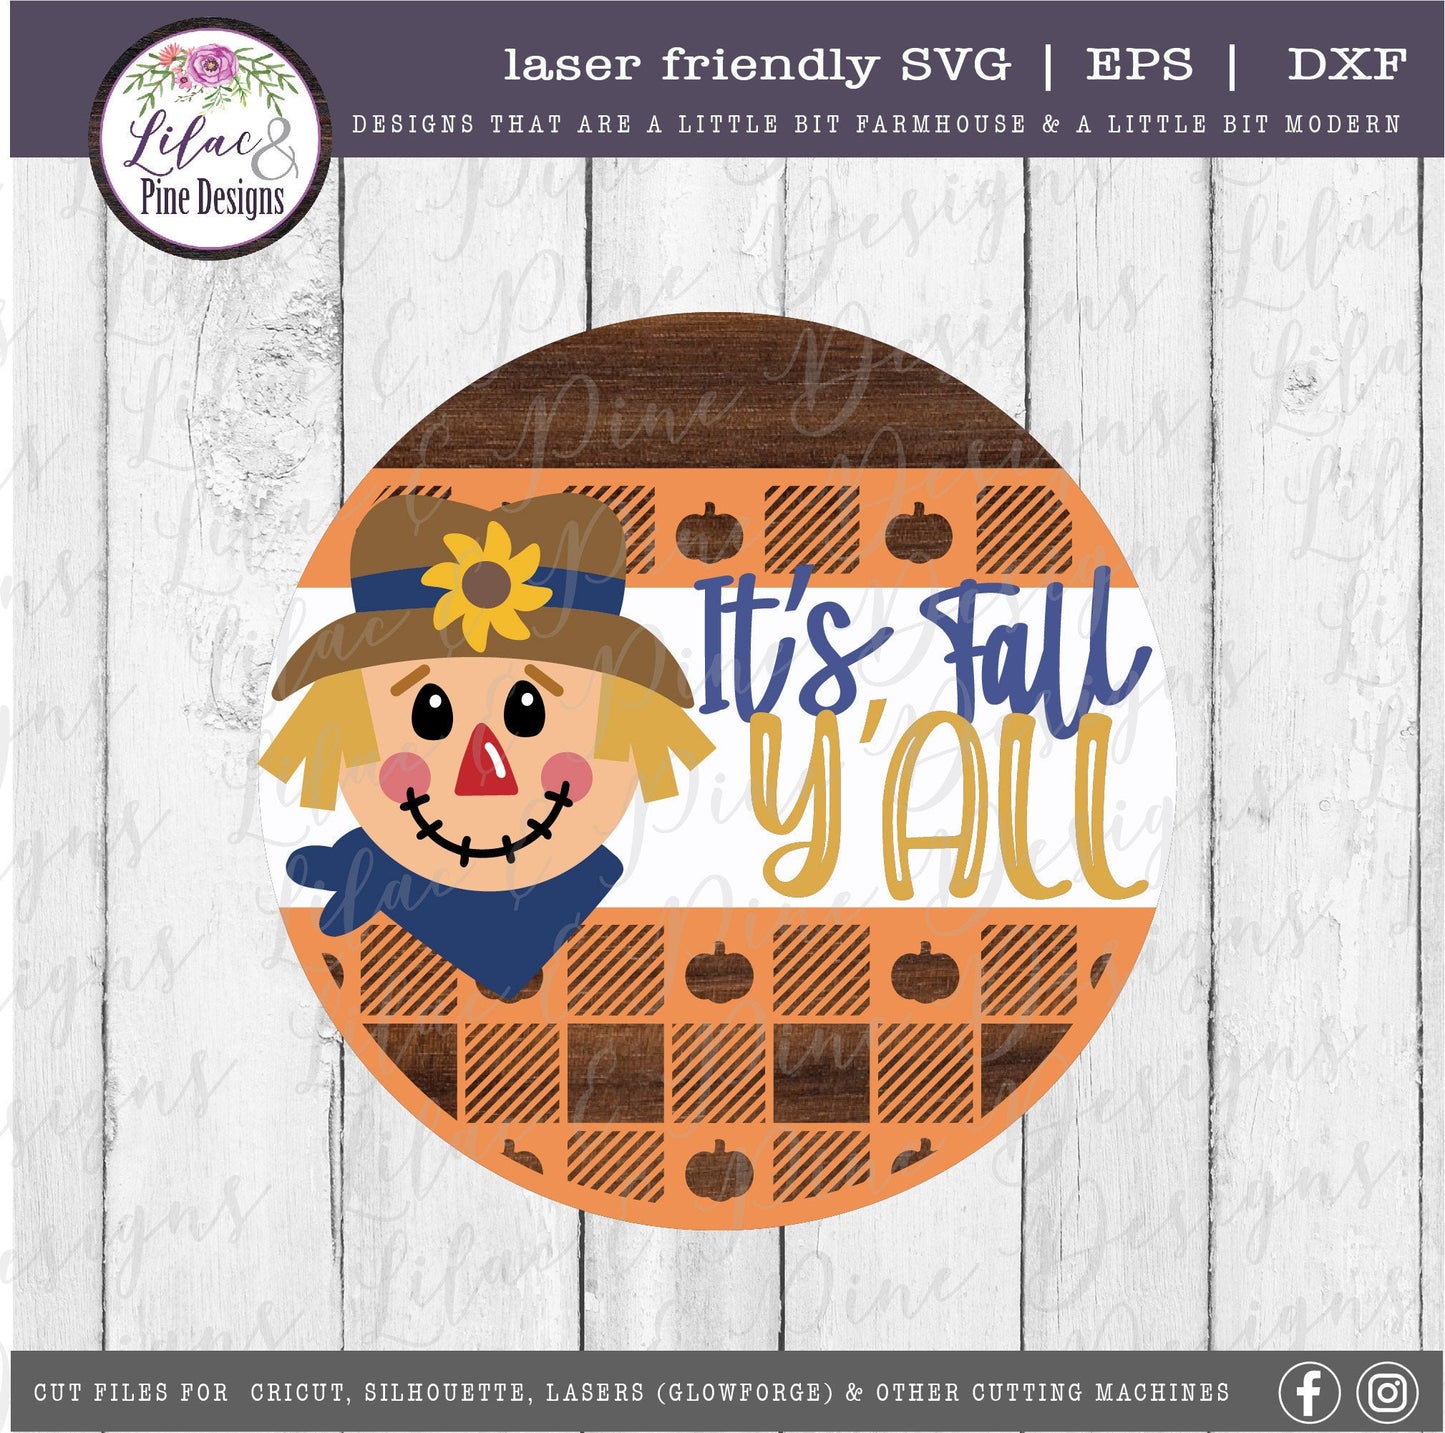 It's Fall Y'all Scarecrow sign SVG, Welcome sign SVG, fall door decor svg, scarecrow SVG, fall svg, plaid svg, Glowforge Svg, laser cut file